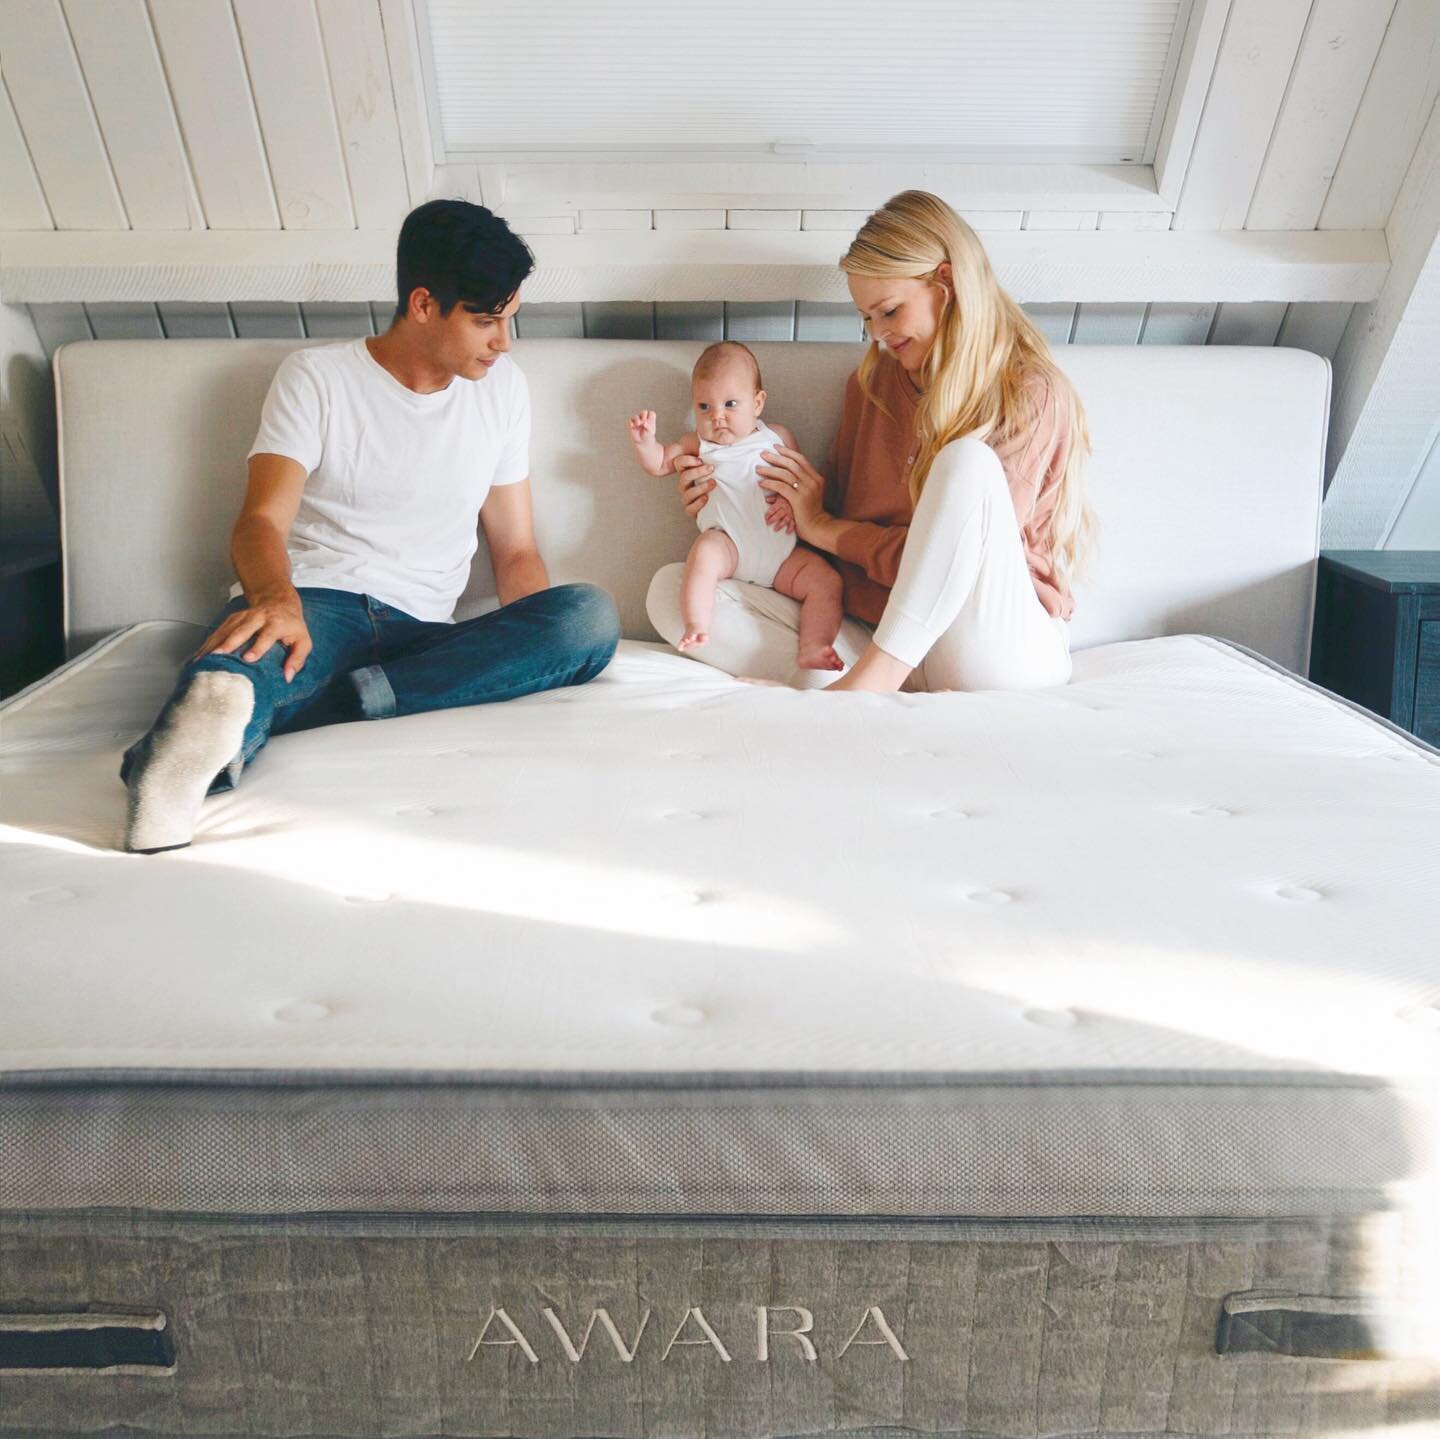 A new mattress at last! 😍 And it&rsquo;s perfection. We have had our @awarasleep mattress for a few months now and it is a DREAM to sleep on. It&rsquo;s also made with organic, natural materials so it doesn&rsquo;t release harmful toxins. 🙌🏻 If yo